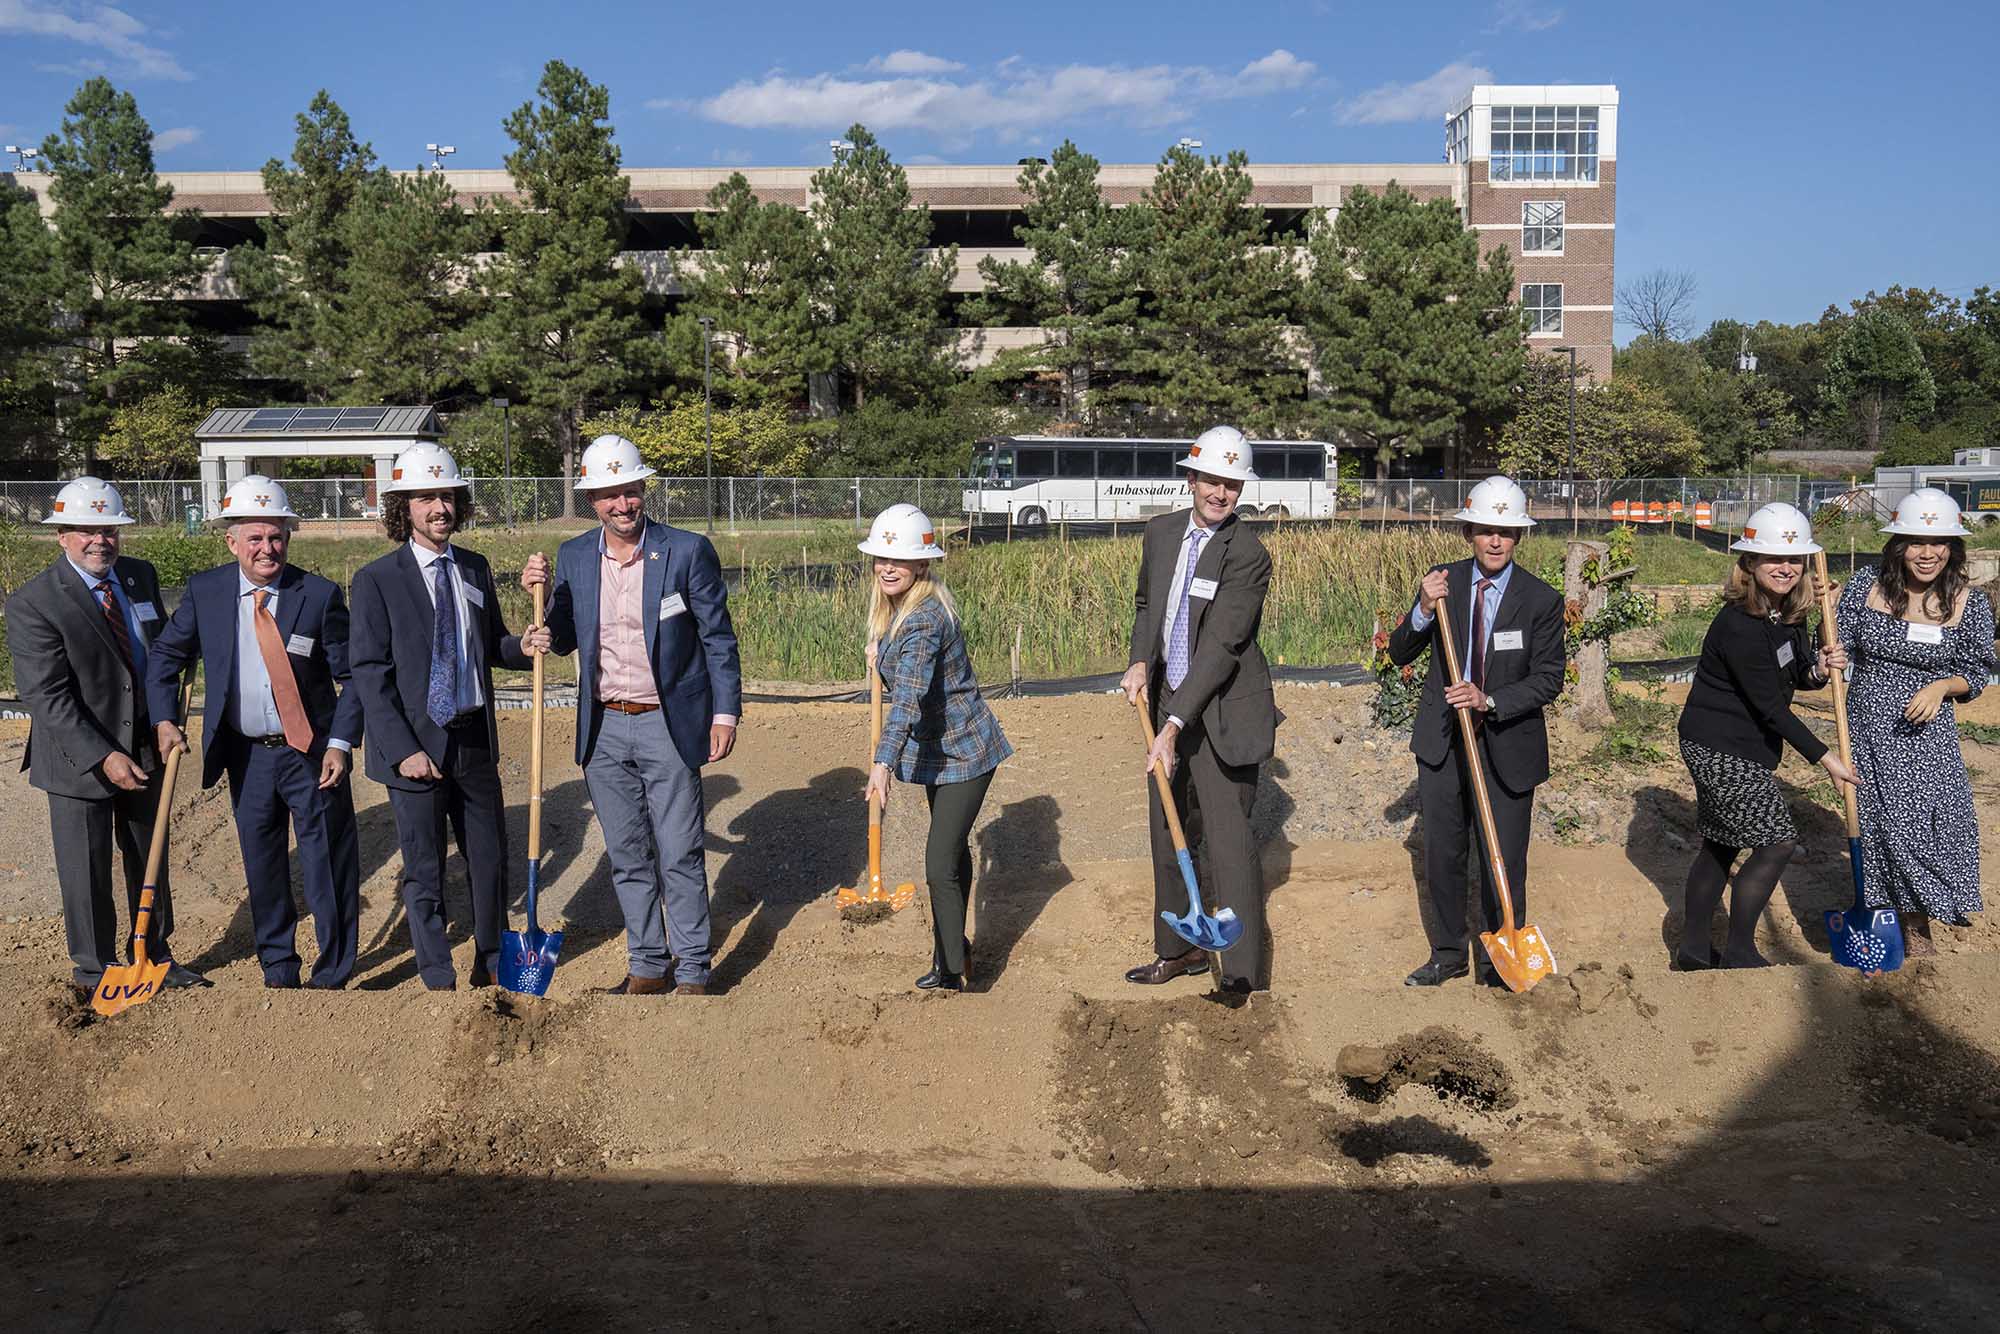 University Officials wearing Hard hats and shovels break ground on the data Science Development project